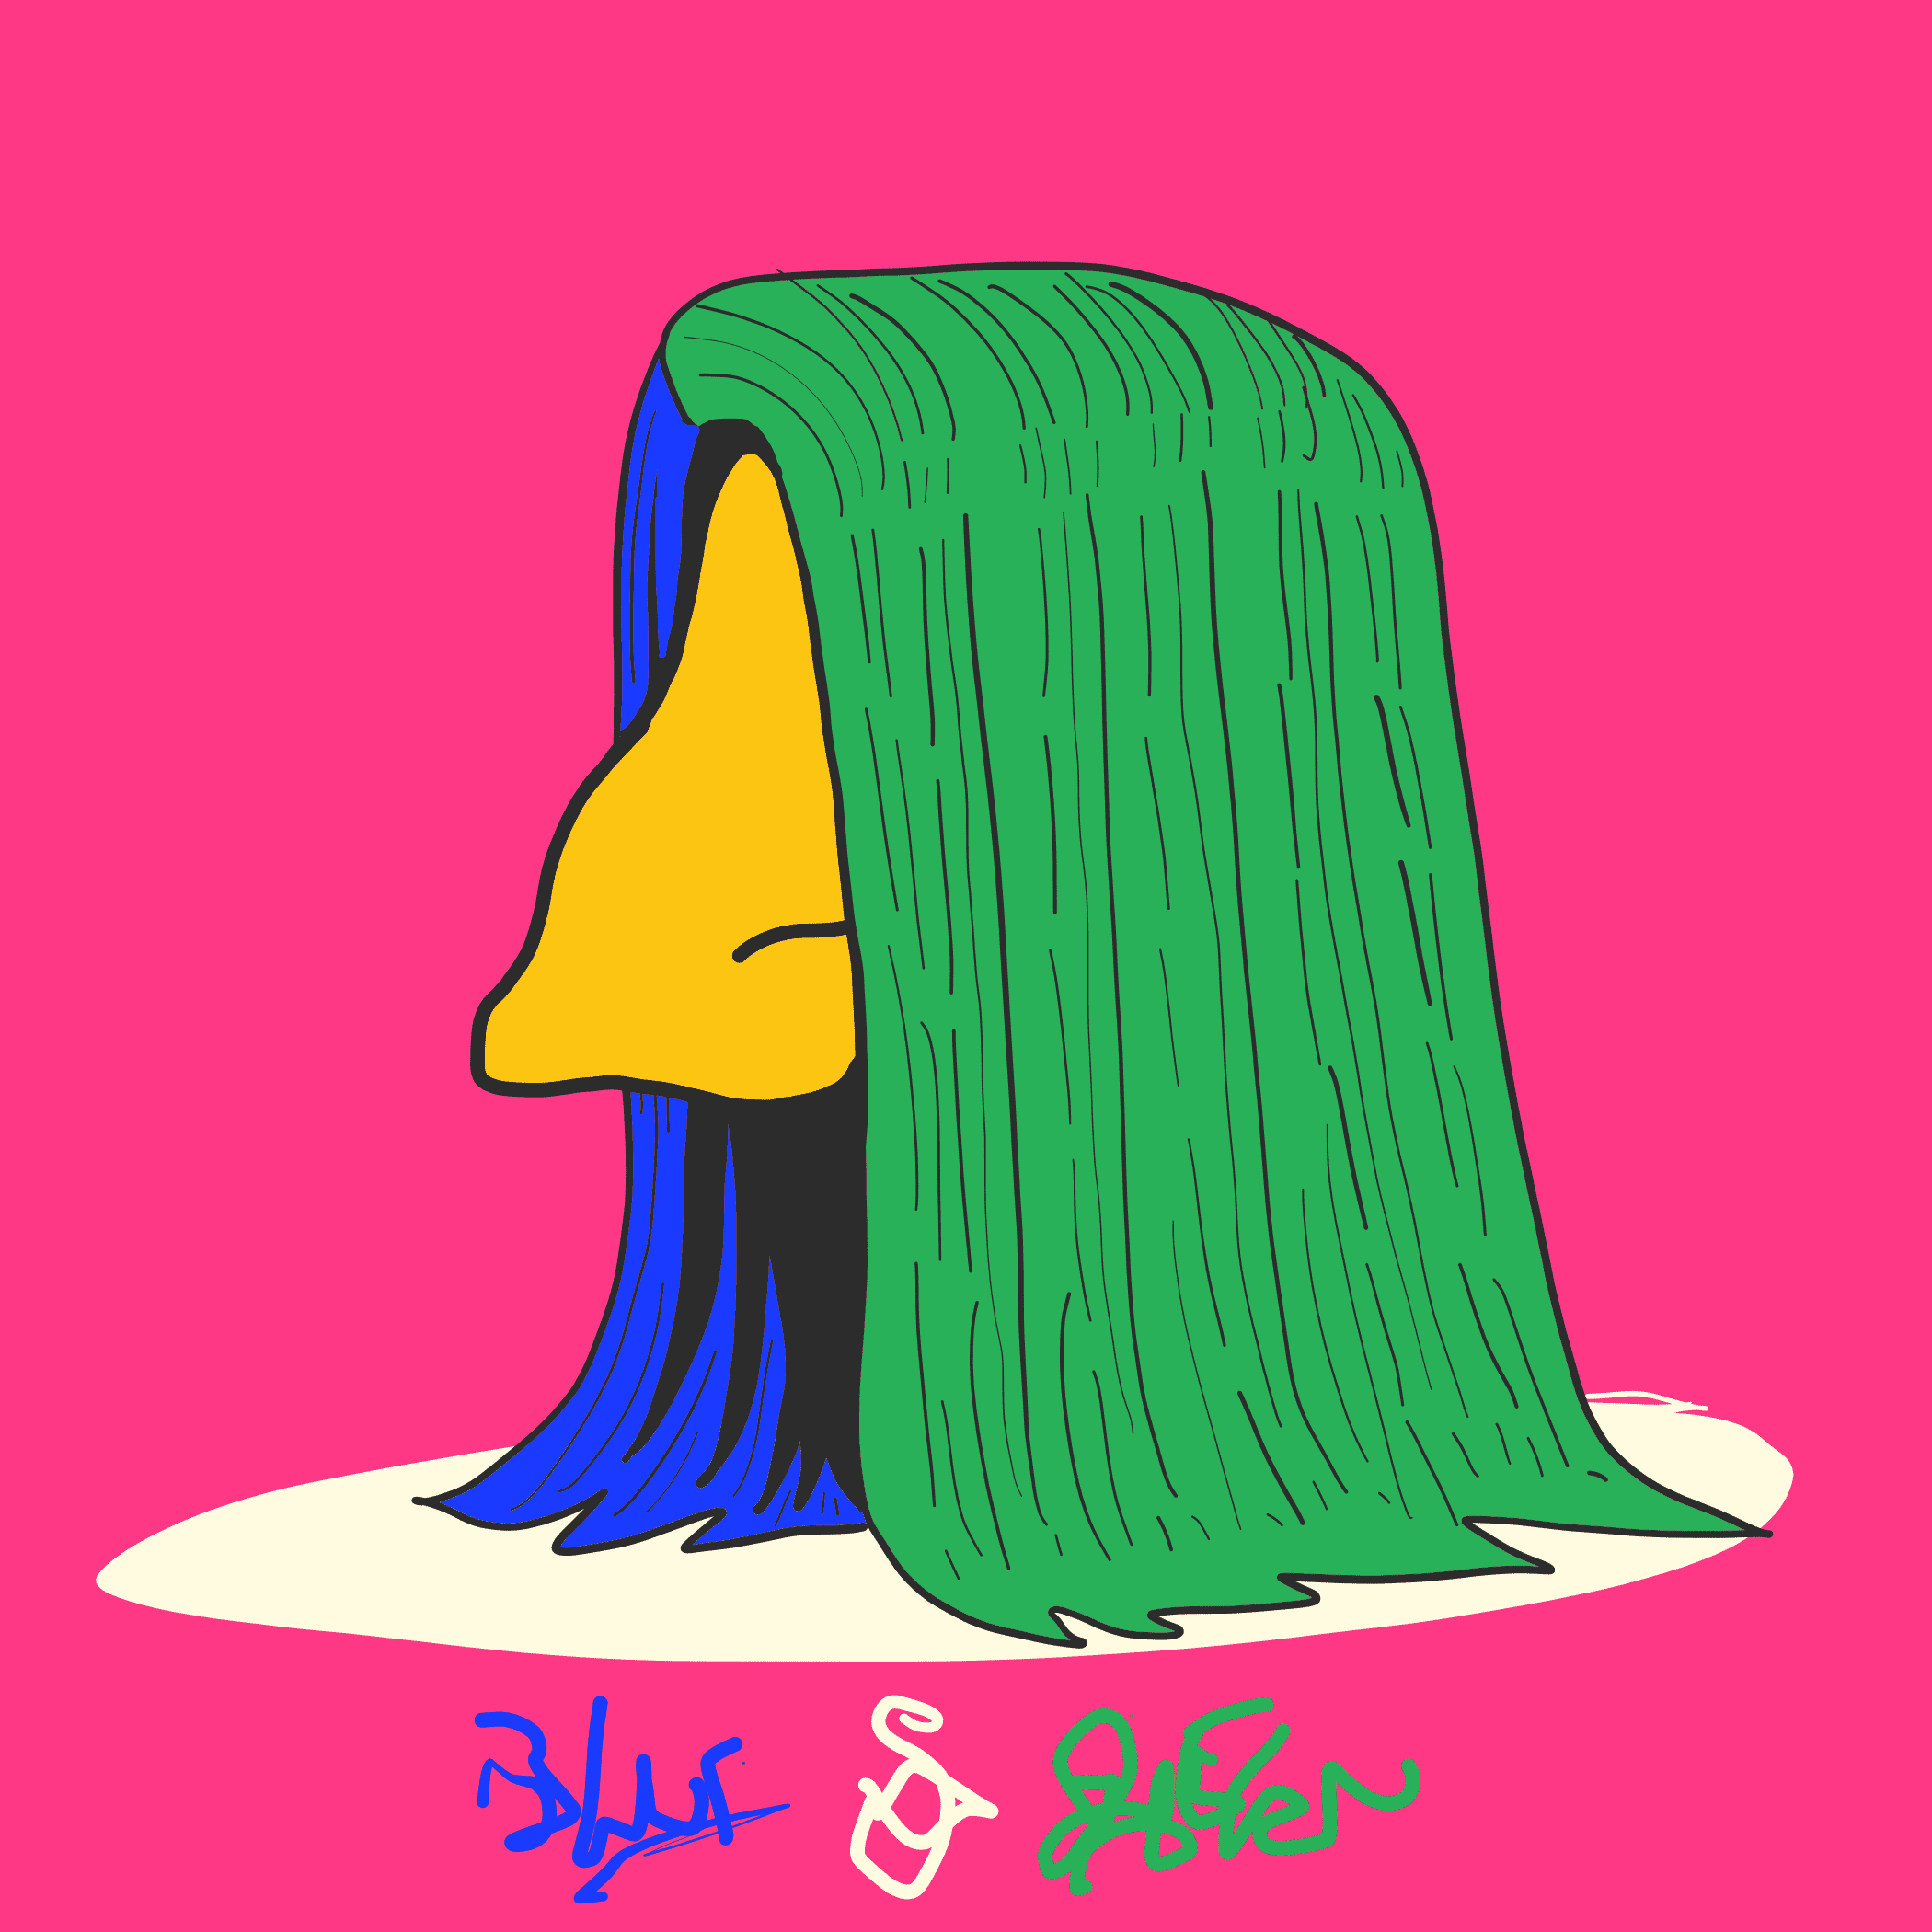 Cover art for Blue & Green by yuri beats